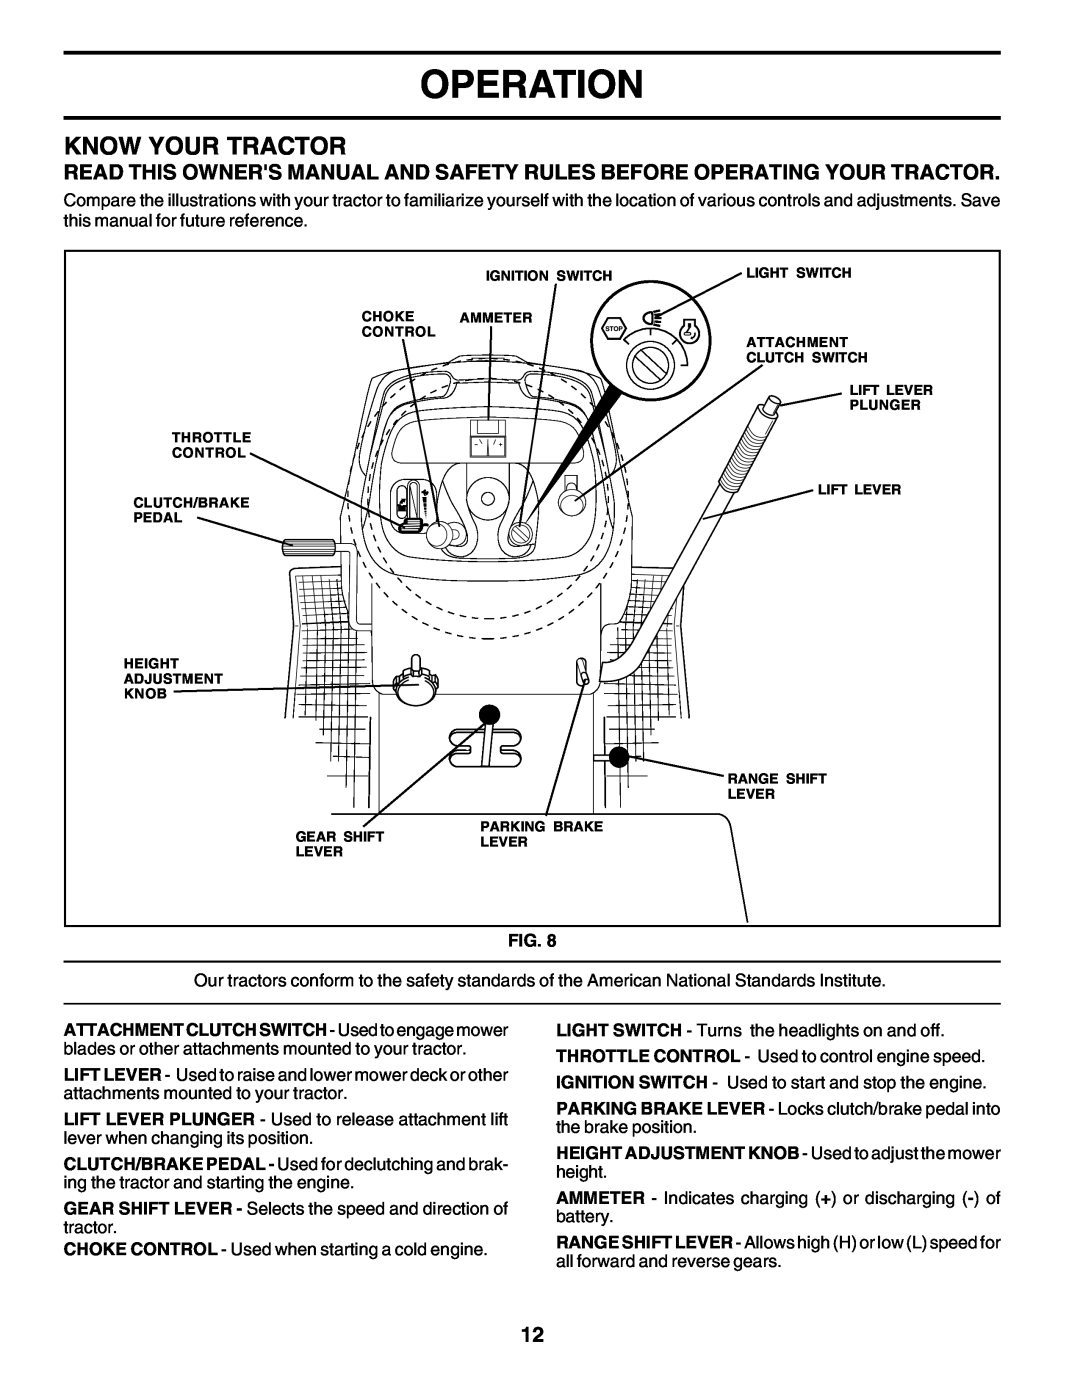 Poulan 177271 owner manual Know Your Tractor, Operation, HEIGHT ADJUSTMENT KNOB - Used to adjust the mower height 